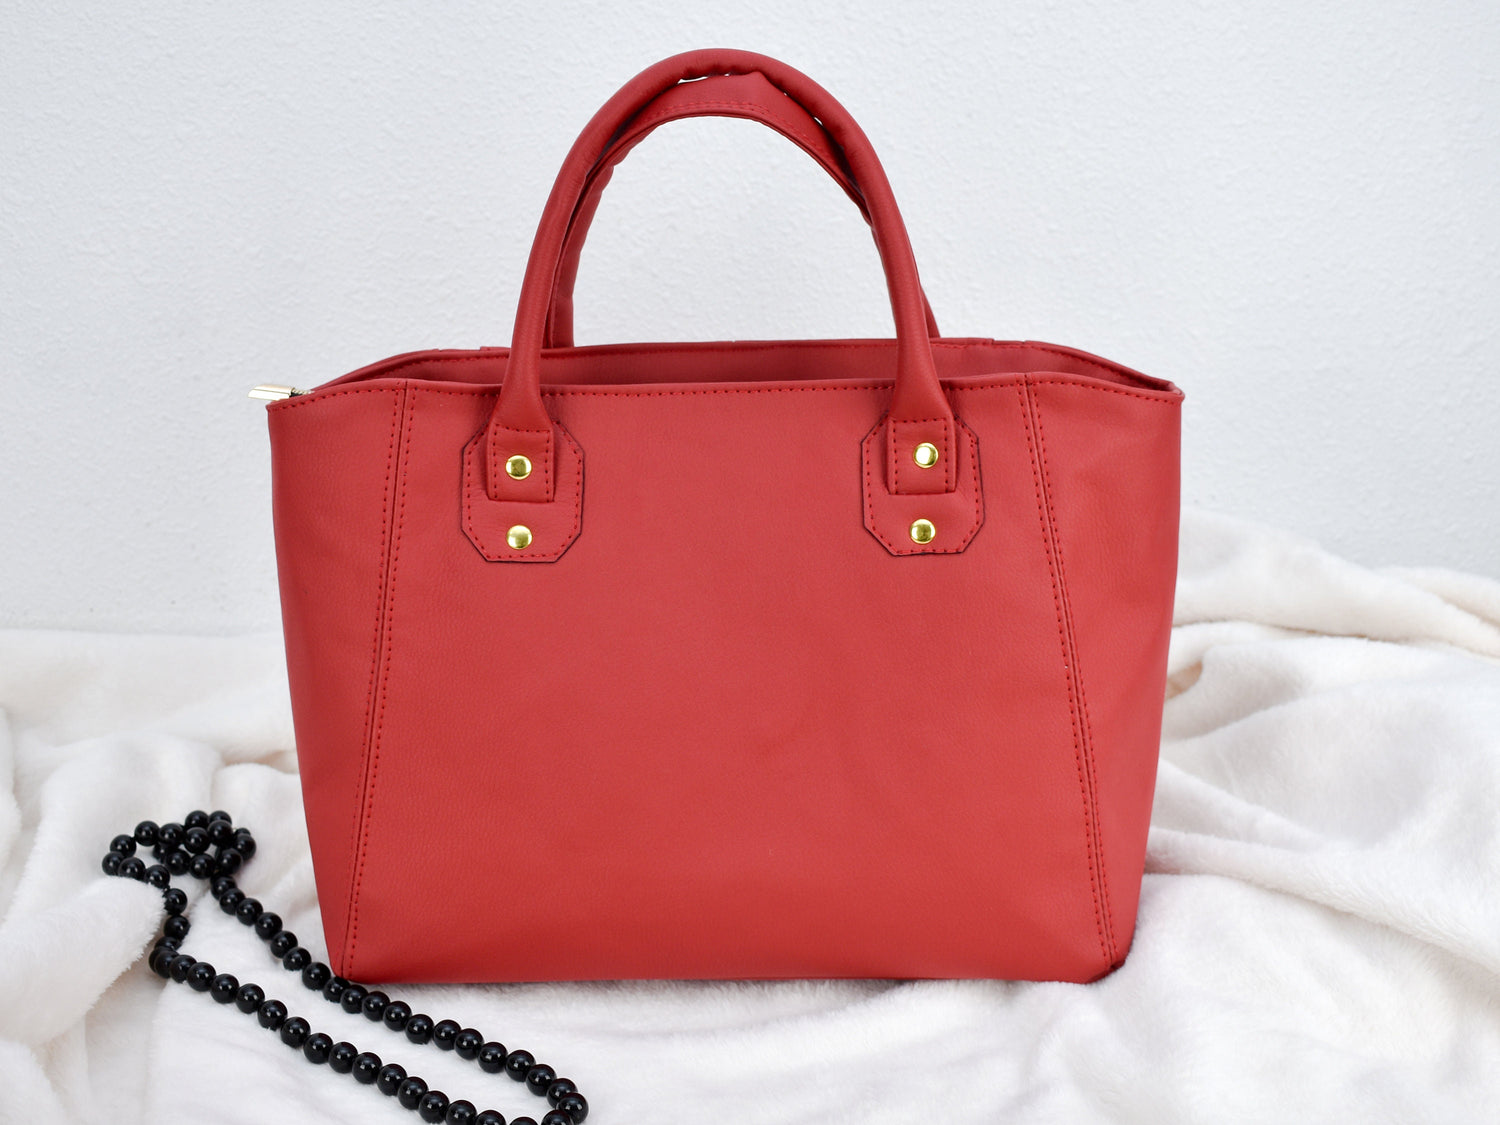 Red Faux Leather Purse - Conceal Carry Handbag - Gift for Mom Grandma Sister -  Eco Friendly Top Handle Tote Bag - CCW - Customizable to Her